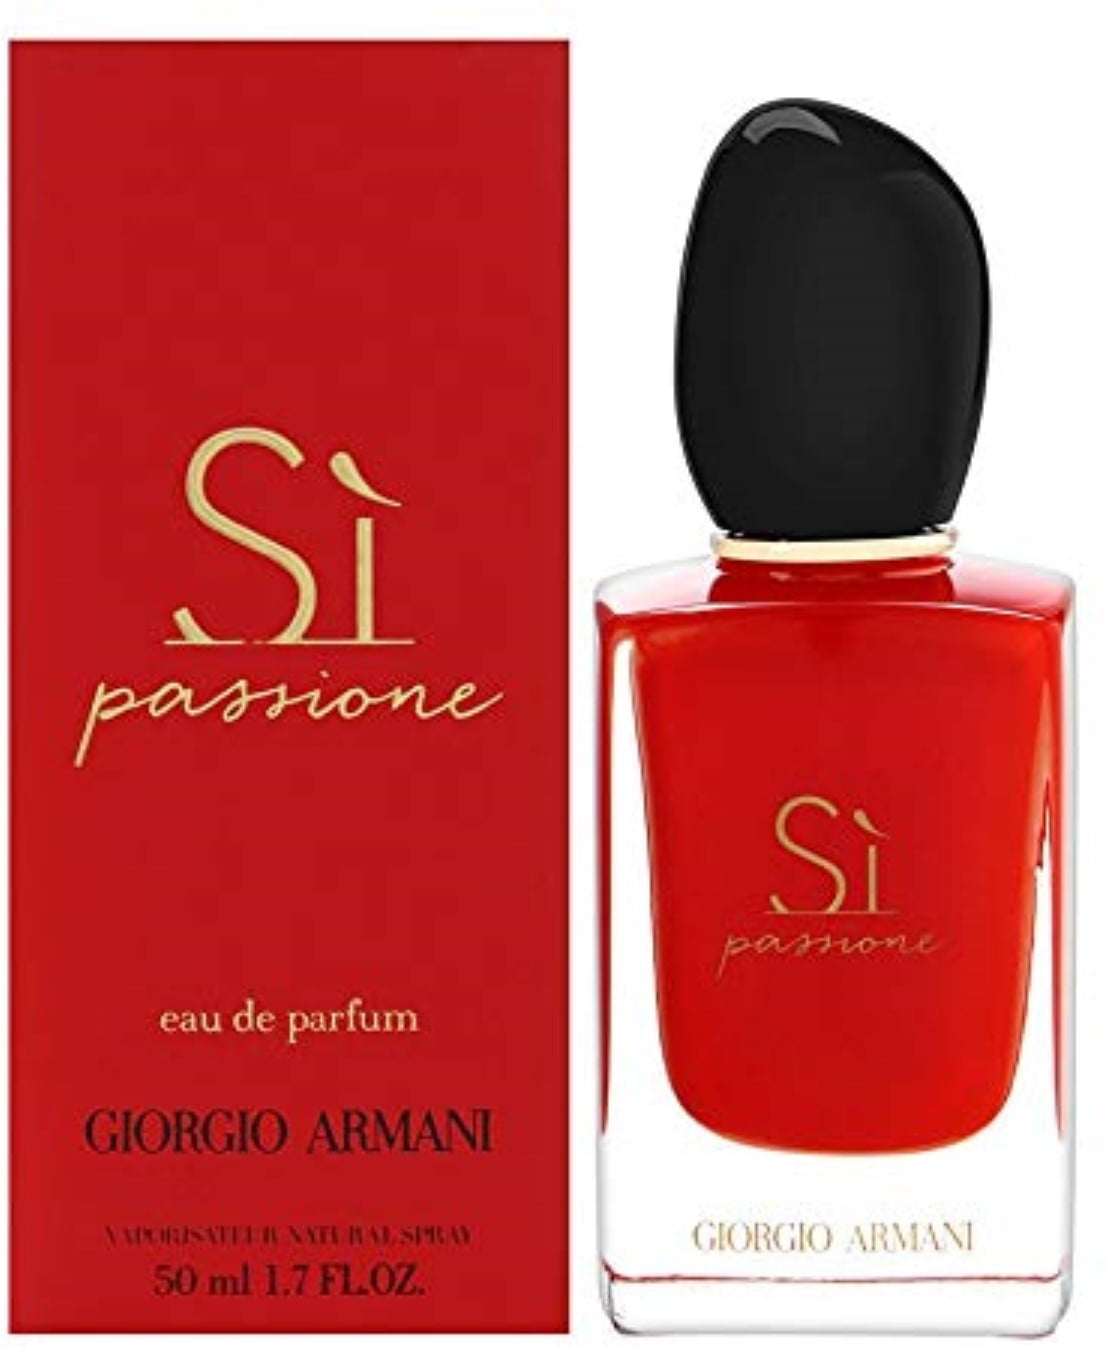 si perfume red bottle